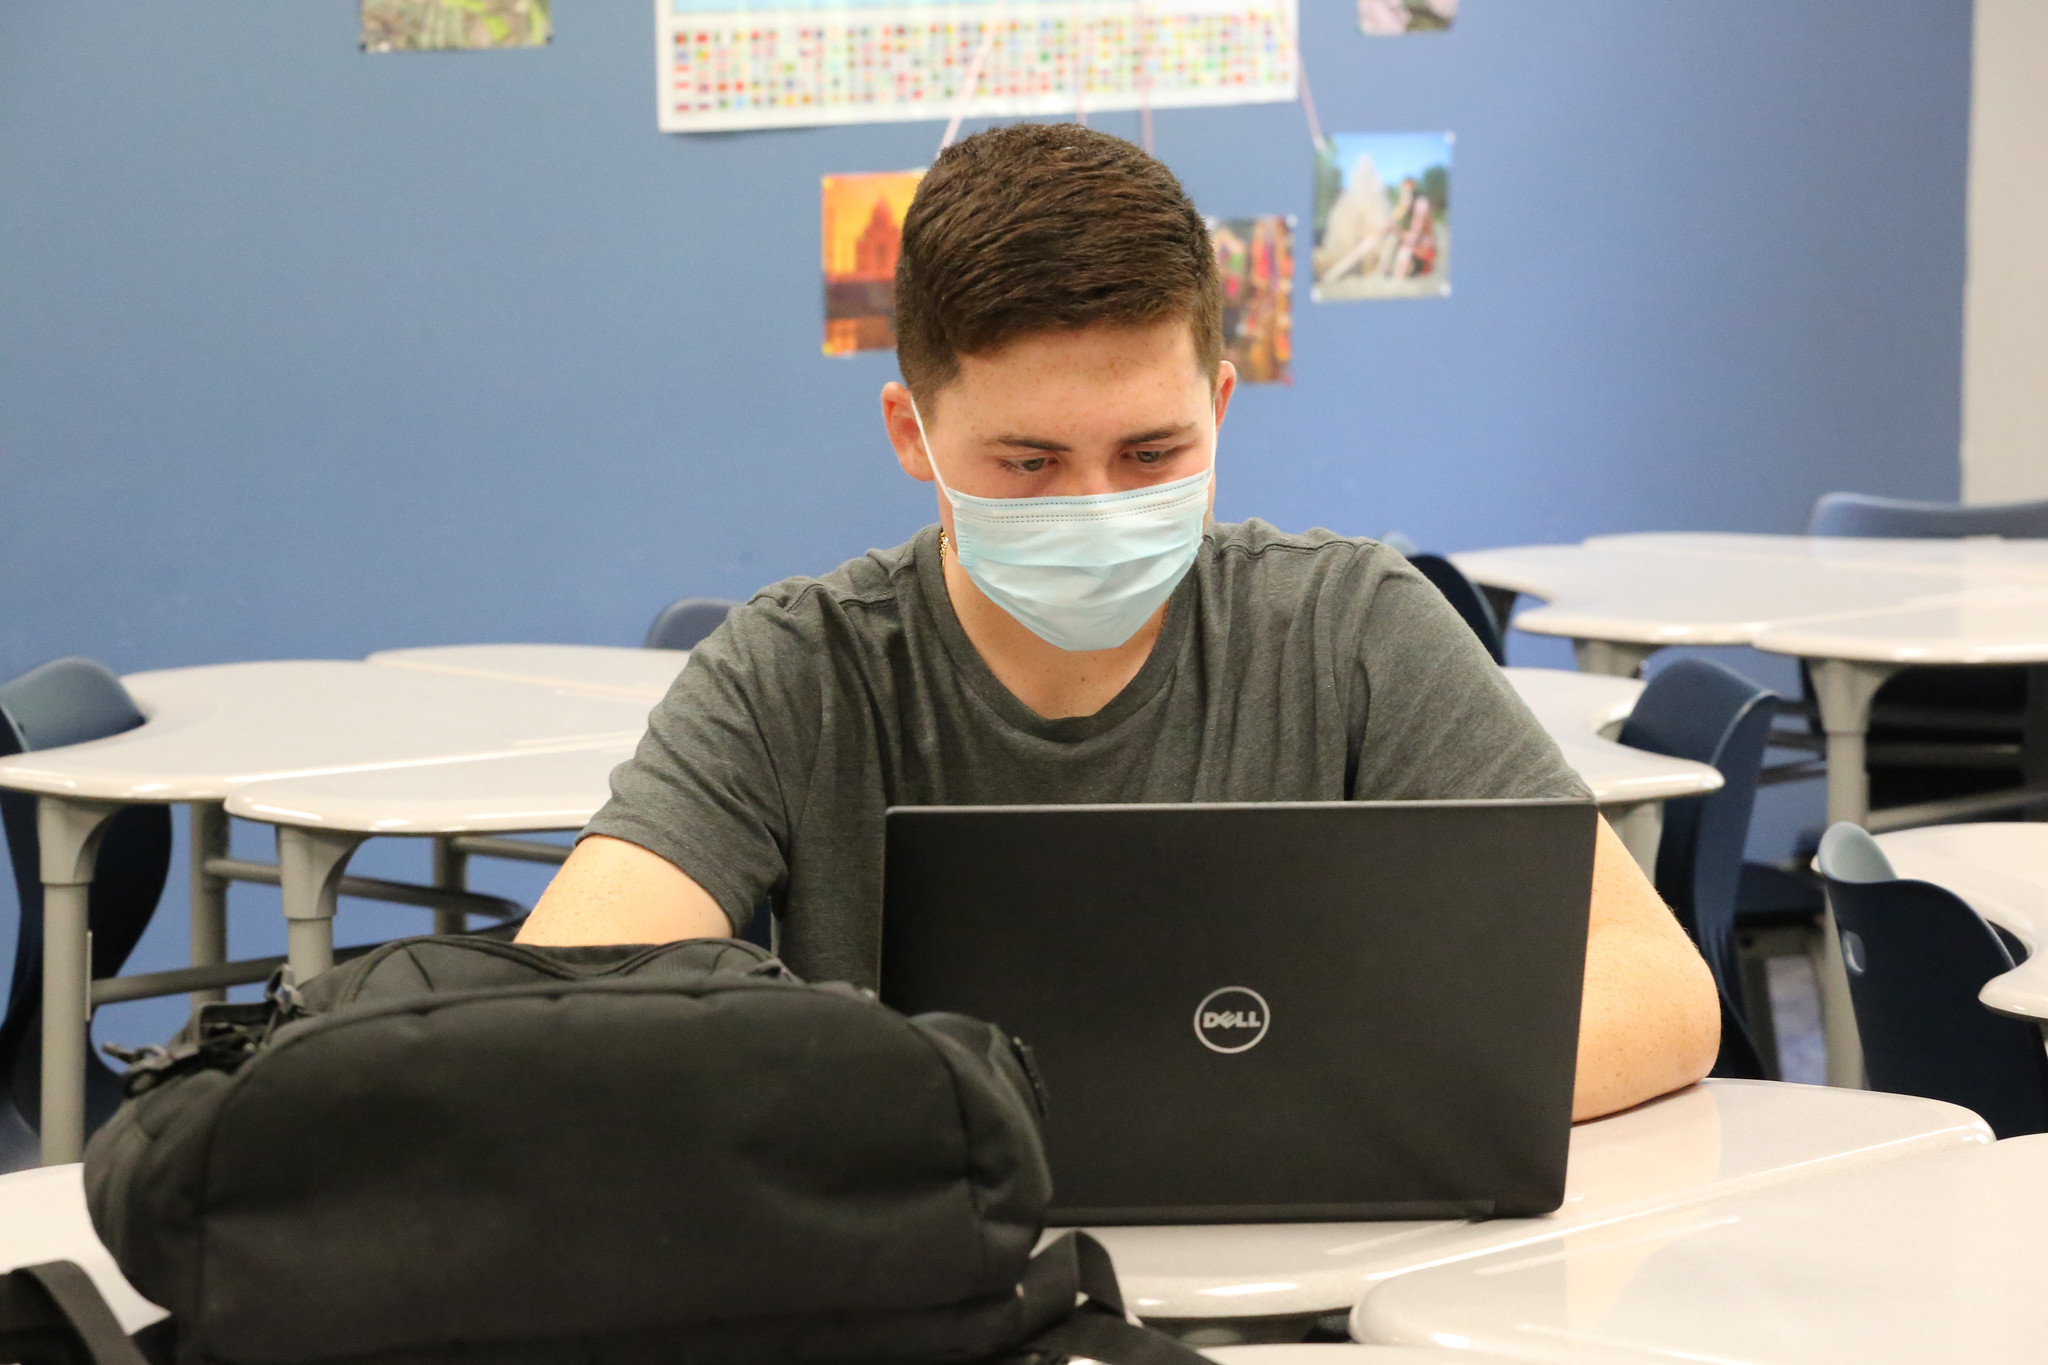 A young teenage boy sits at a desk on a laptop. He is wearing a grey t-shirt and a disposable face mask and has short, dark hair.